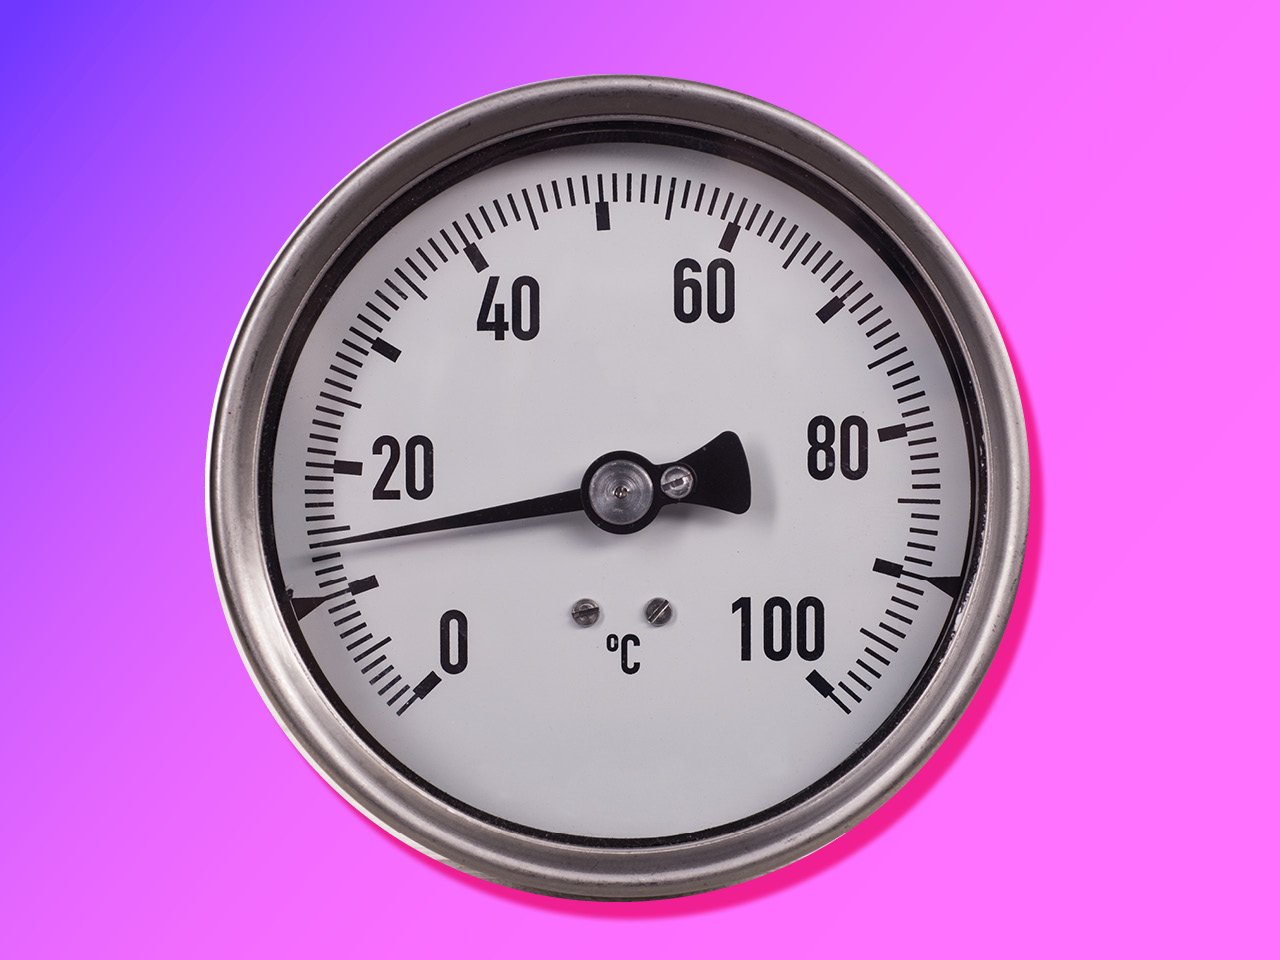 Oven thermometer on purple ombre background.